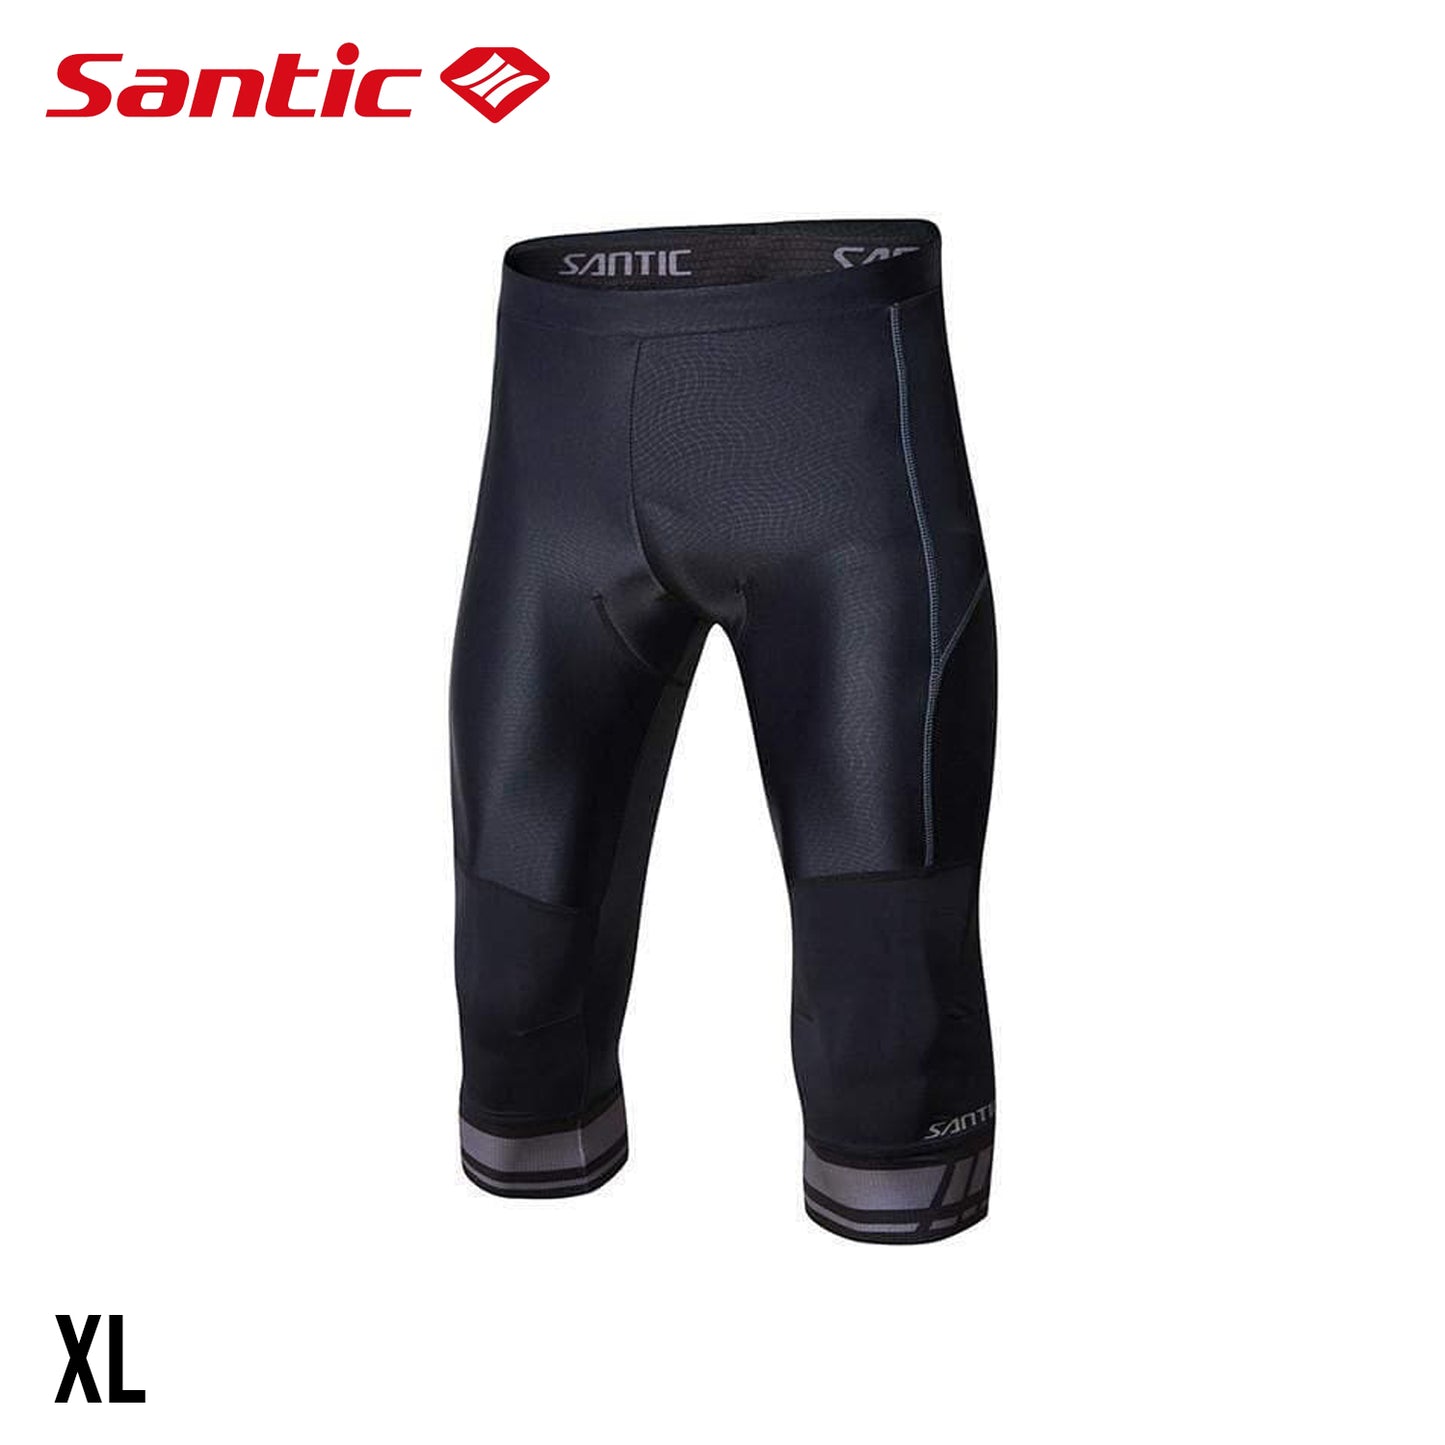 Santic Grayscale Men's Spring Summer 3/4 Cycling Tights - Black